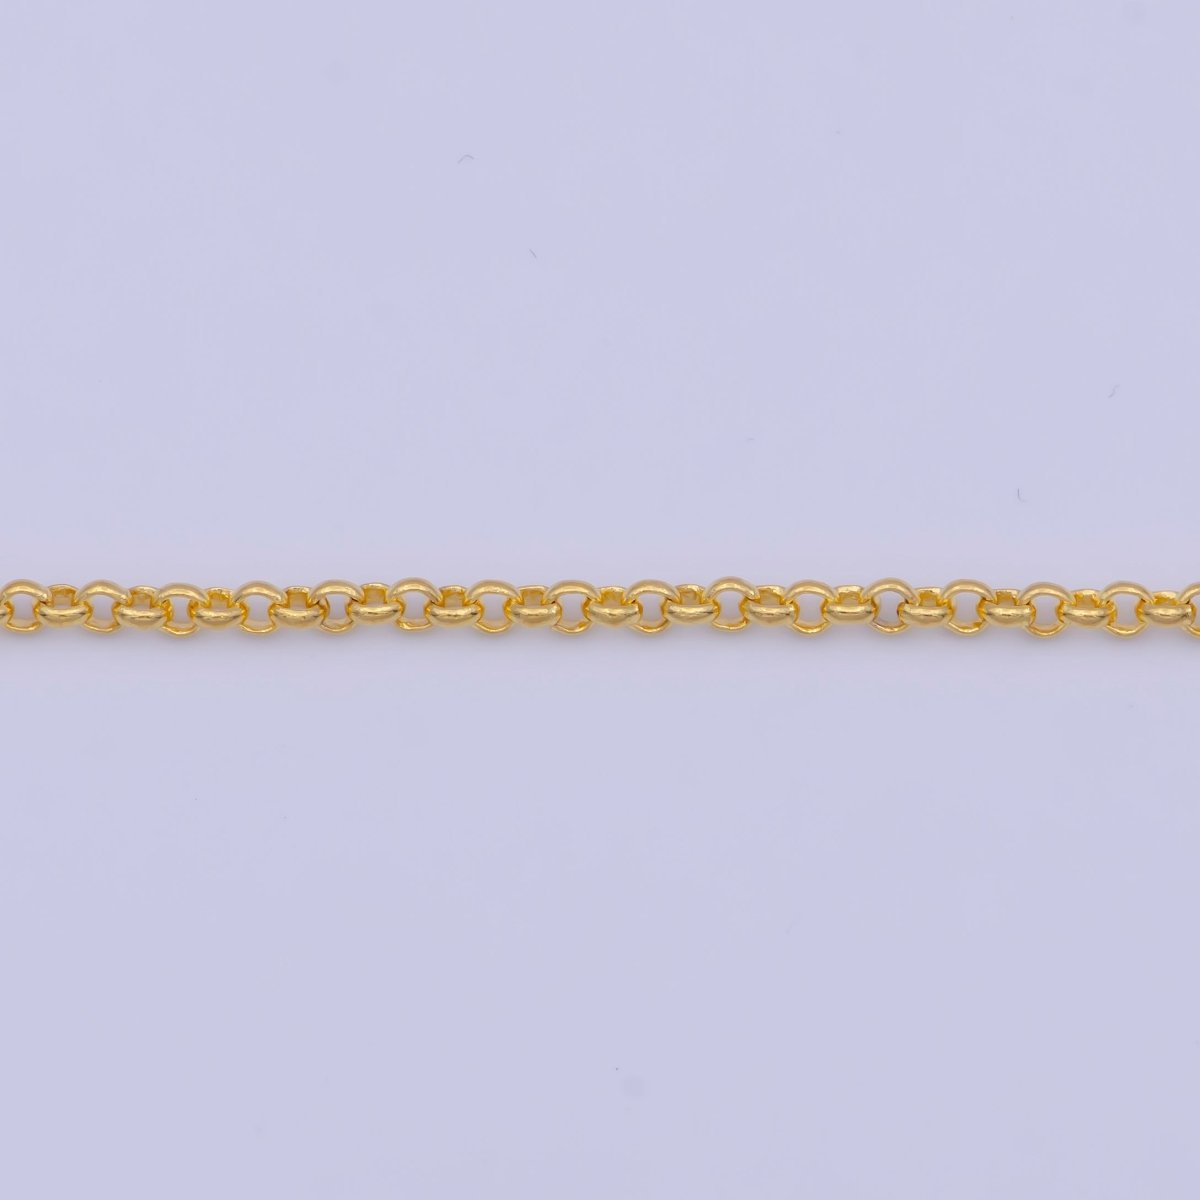 Dainty 24K Gold Filled Rolo Chain Necklace Gold Link Chain Necklace Ready to Wear 17.5 Inch | WA-1150 Clearance Pricing - DLUXCA